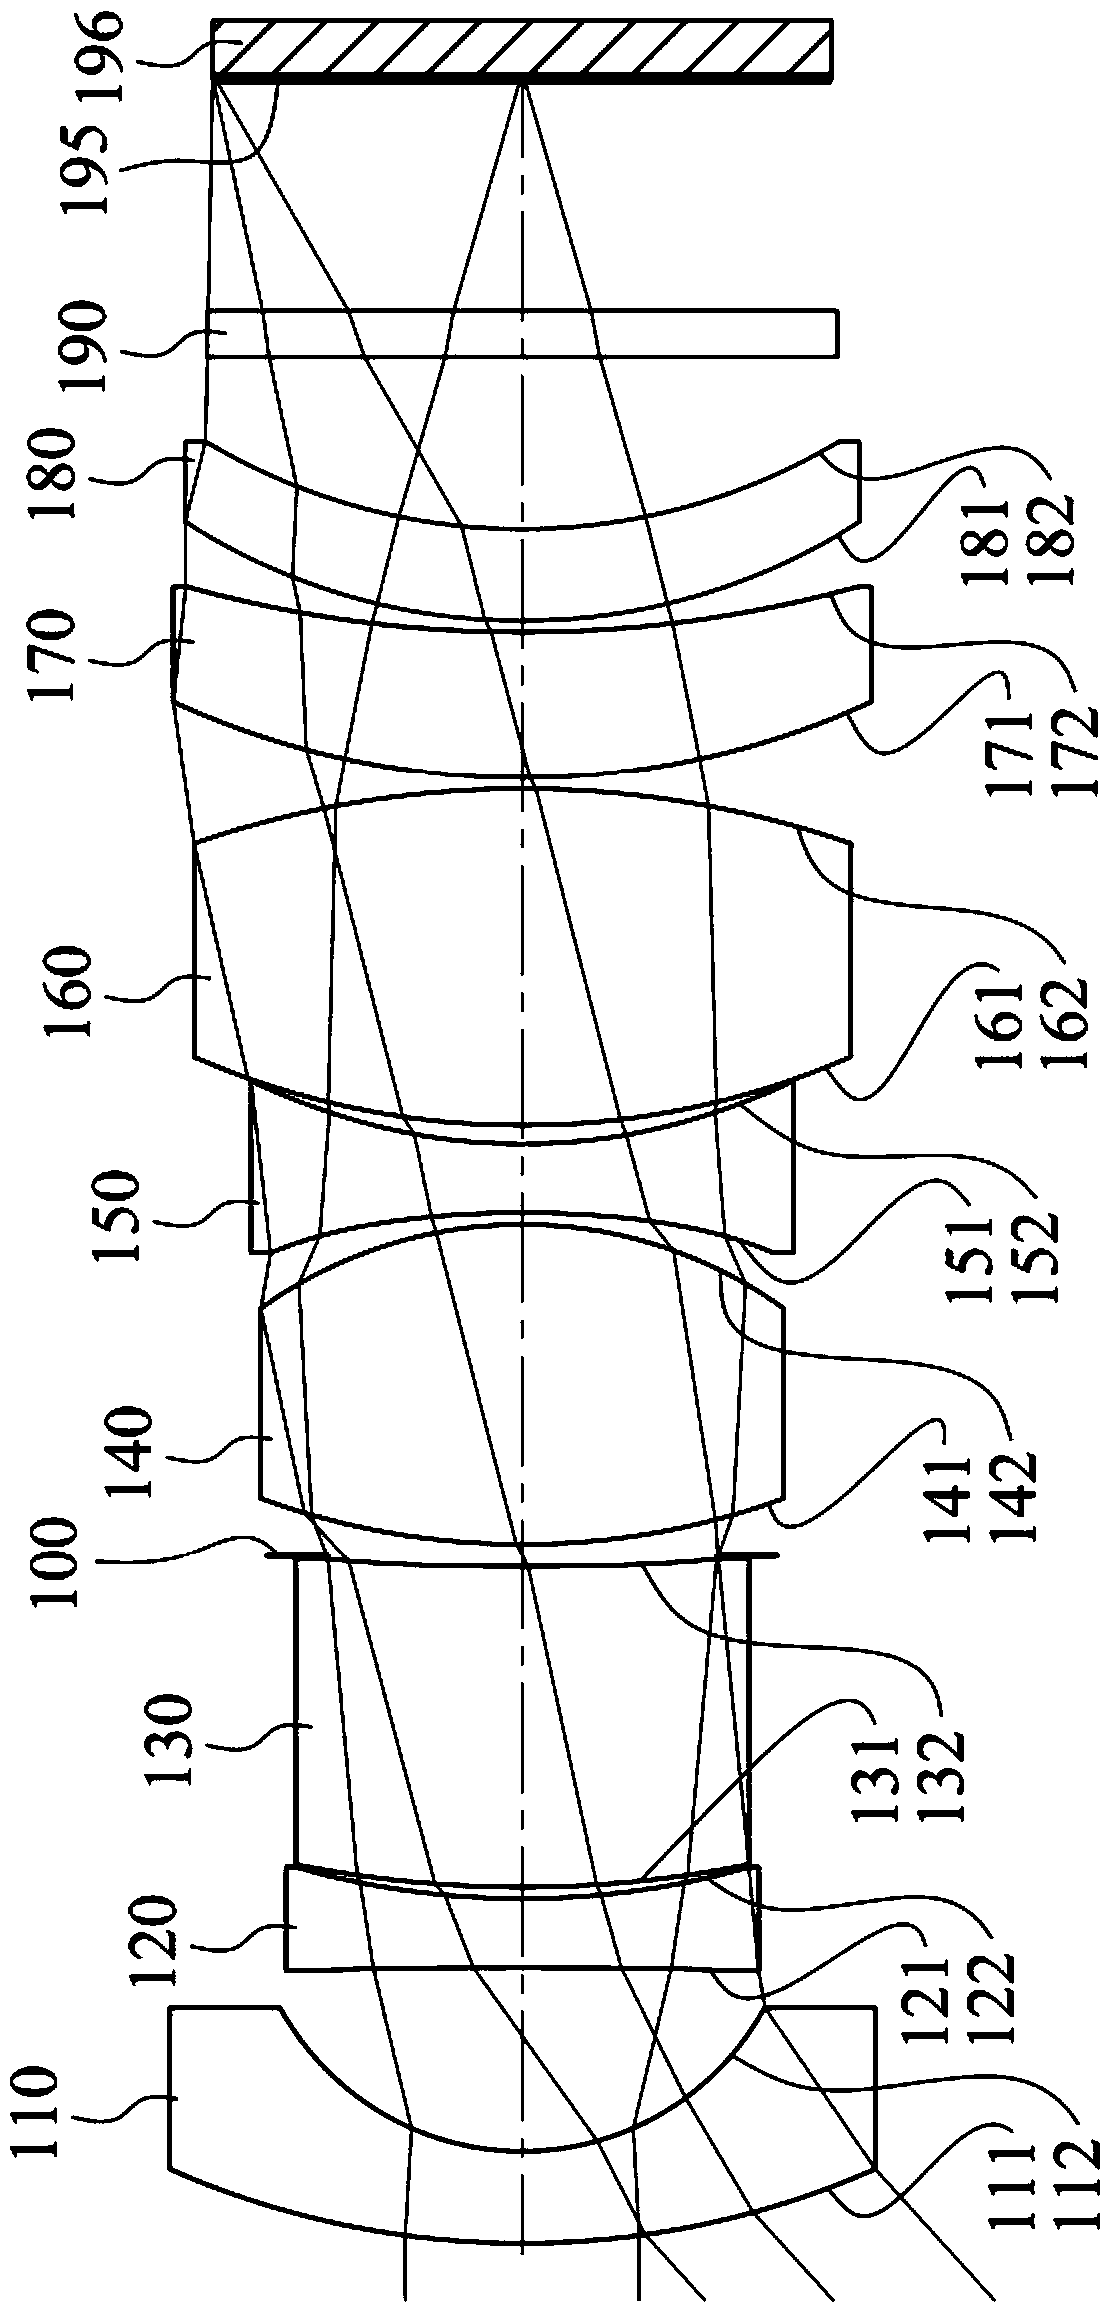 Optical lens group for imaging, imaging device and electronic device